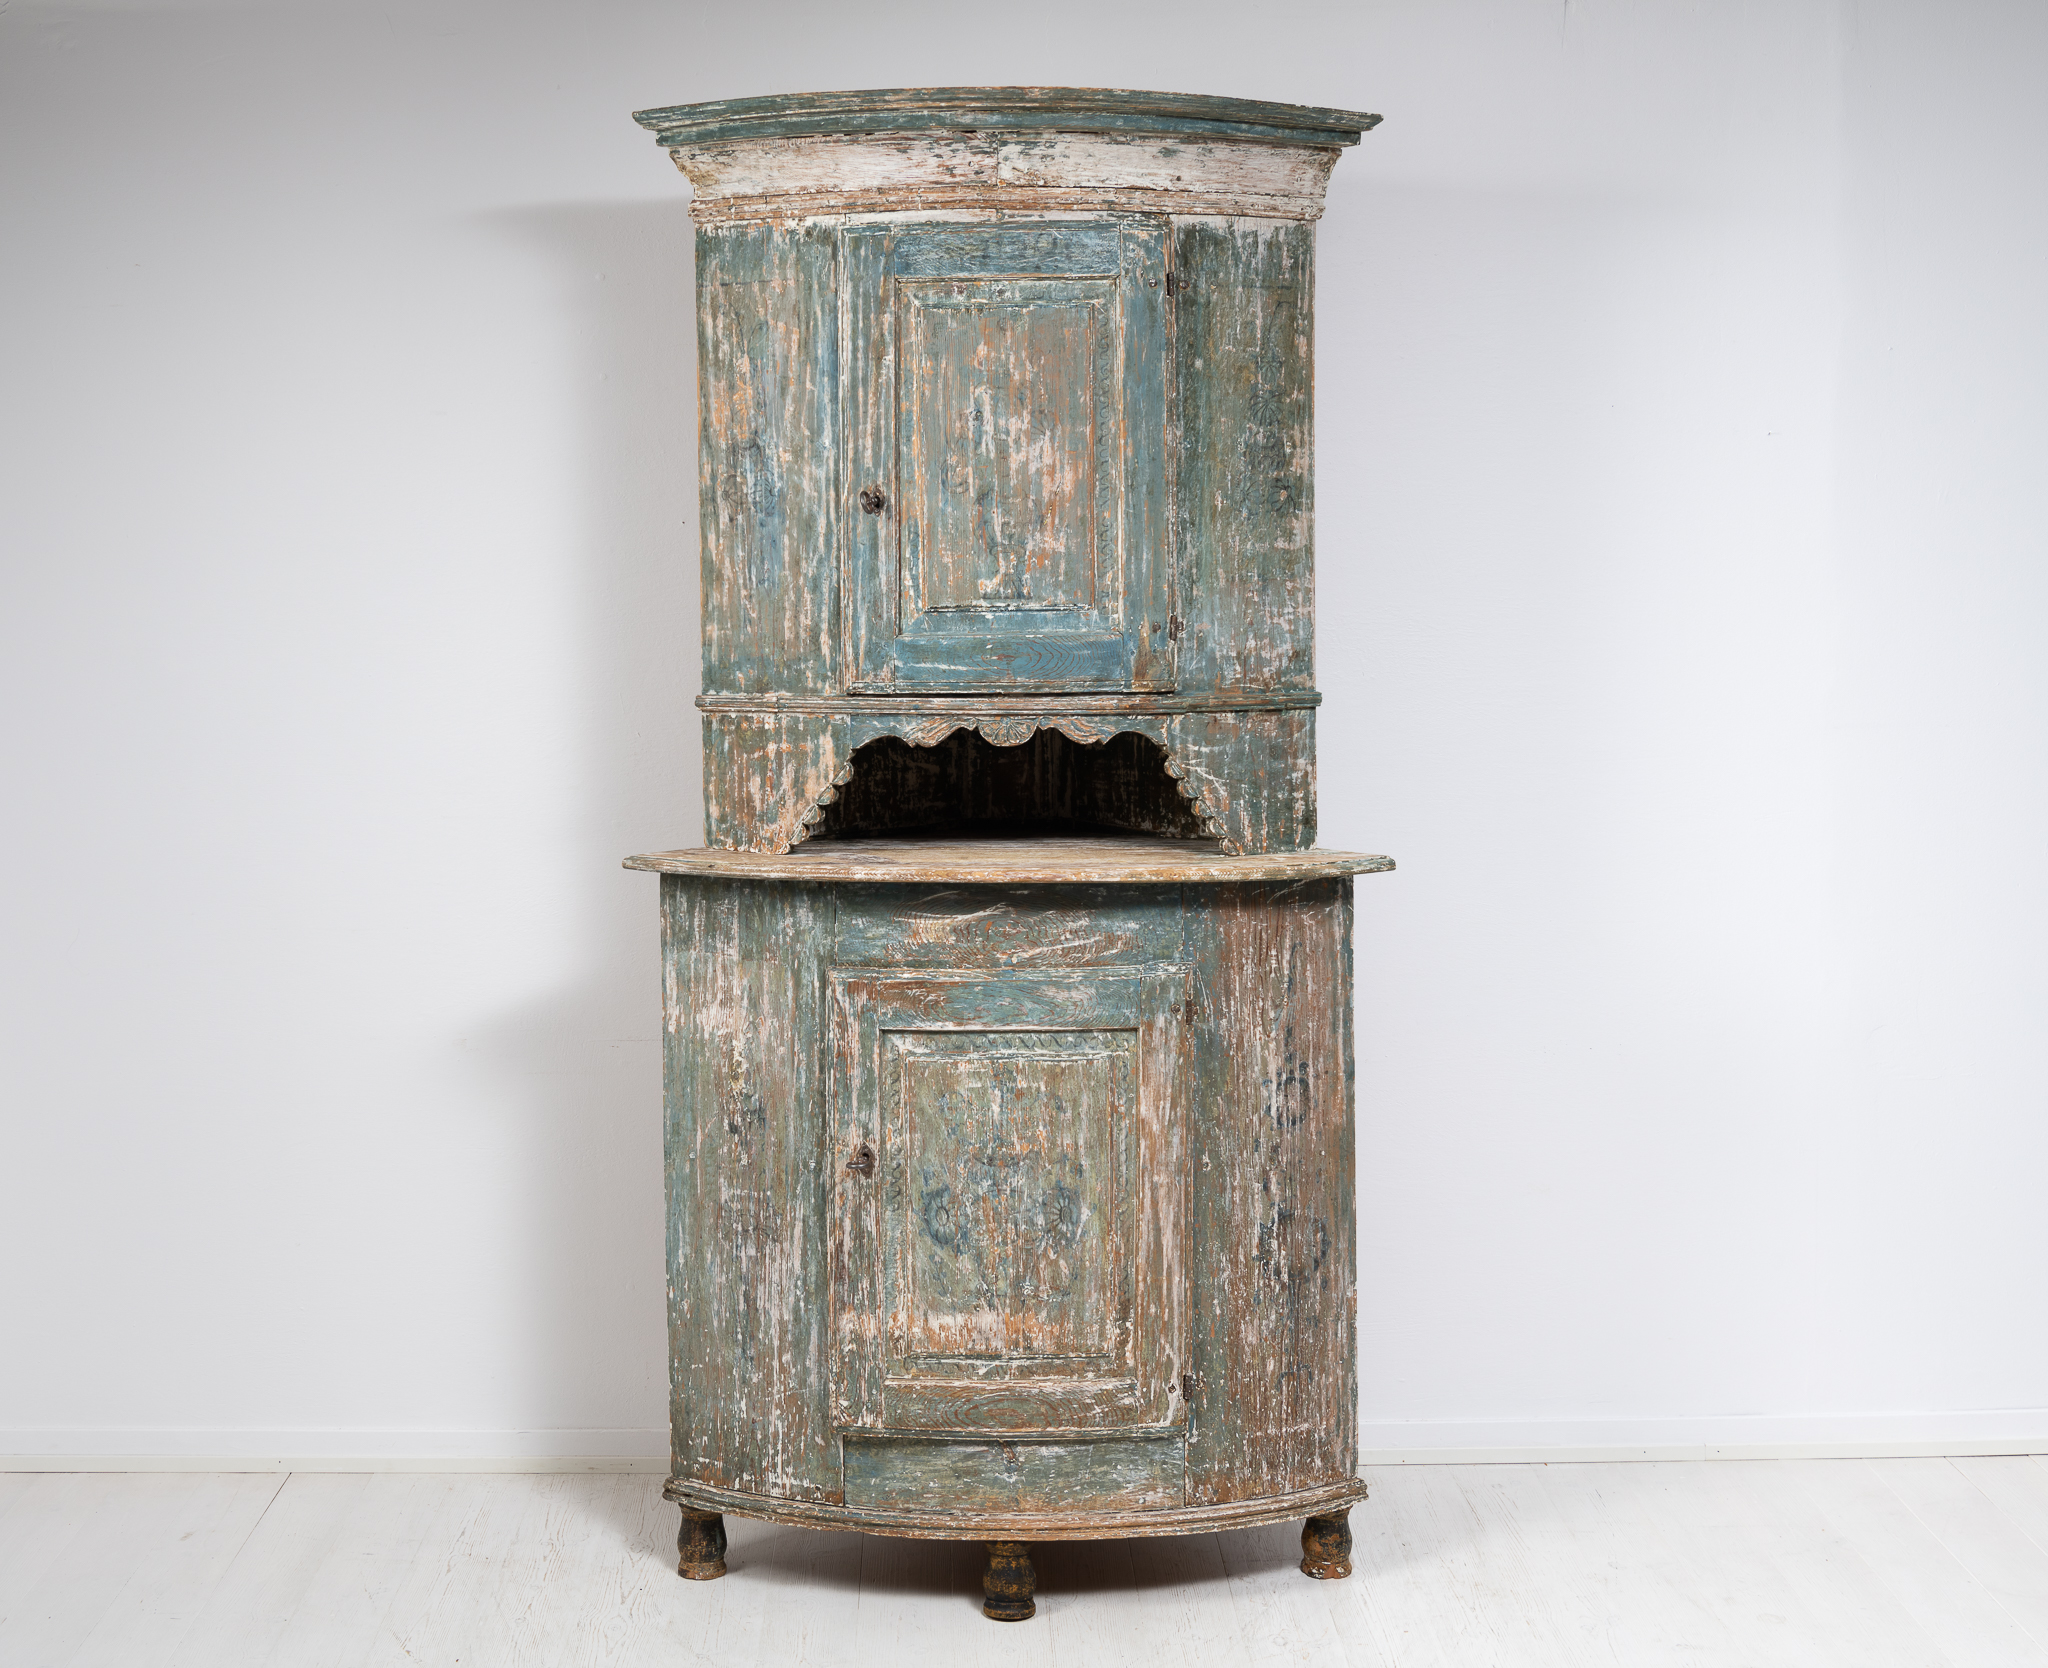 Country home corner cabinet from northern Sweden. The cabinet is a Swedish country home furniture from the first half of the 19th century